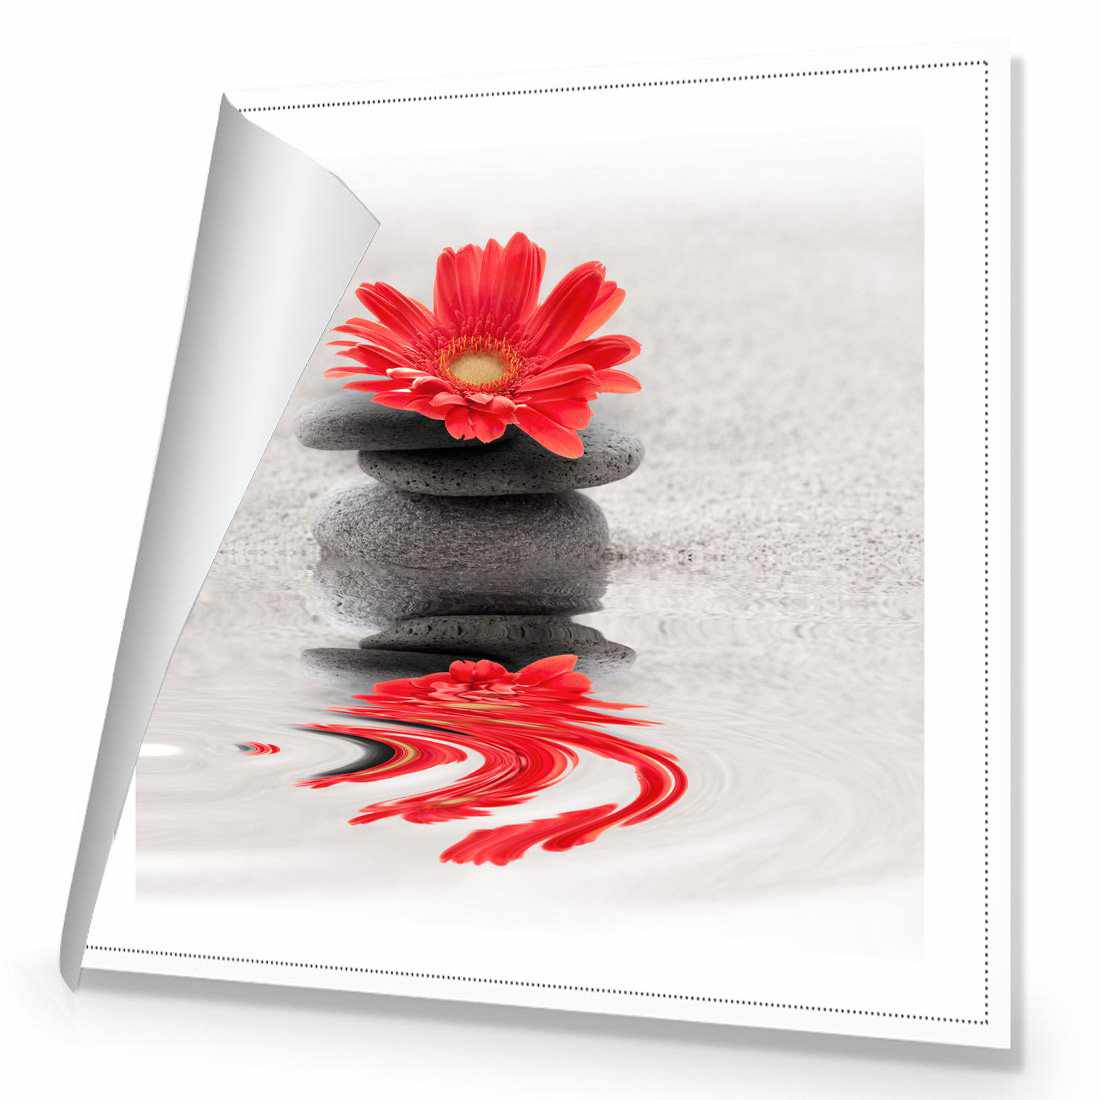 Red Flower Reflection Canvas Art-Canvas-Wall Art Designs-30x30cm-Rolled Canvas-Wall Art Designs